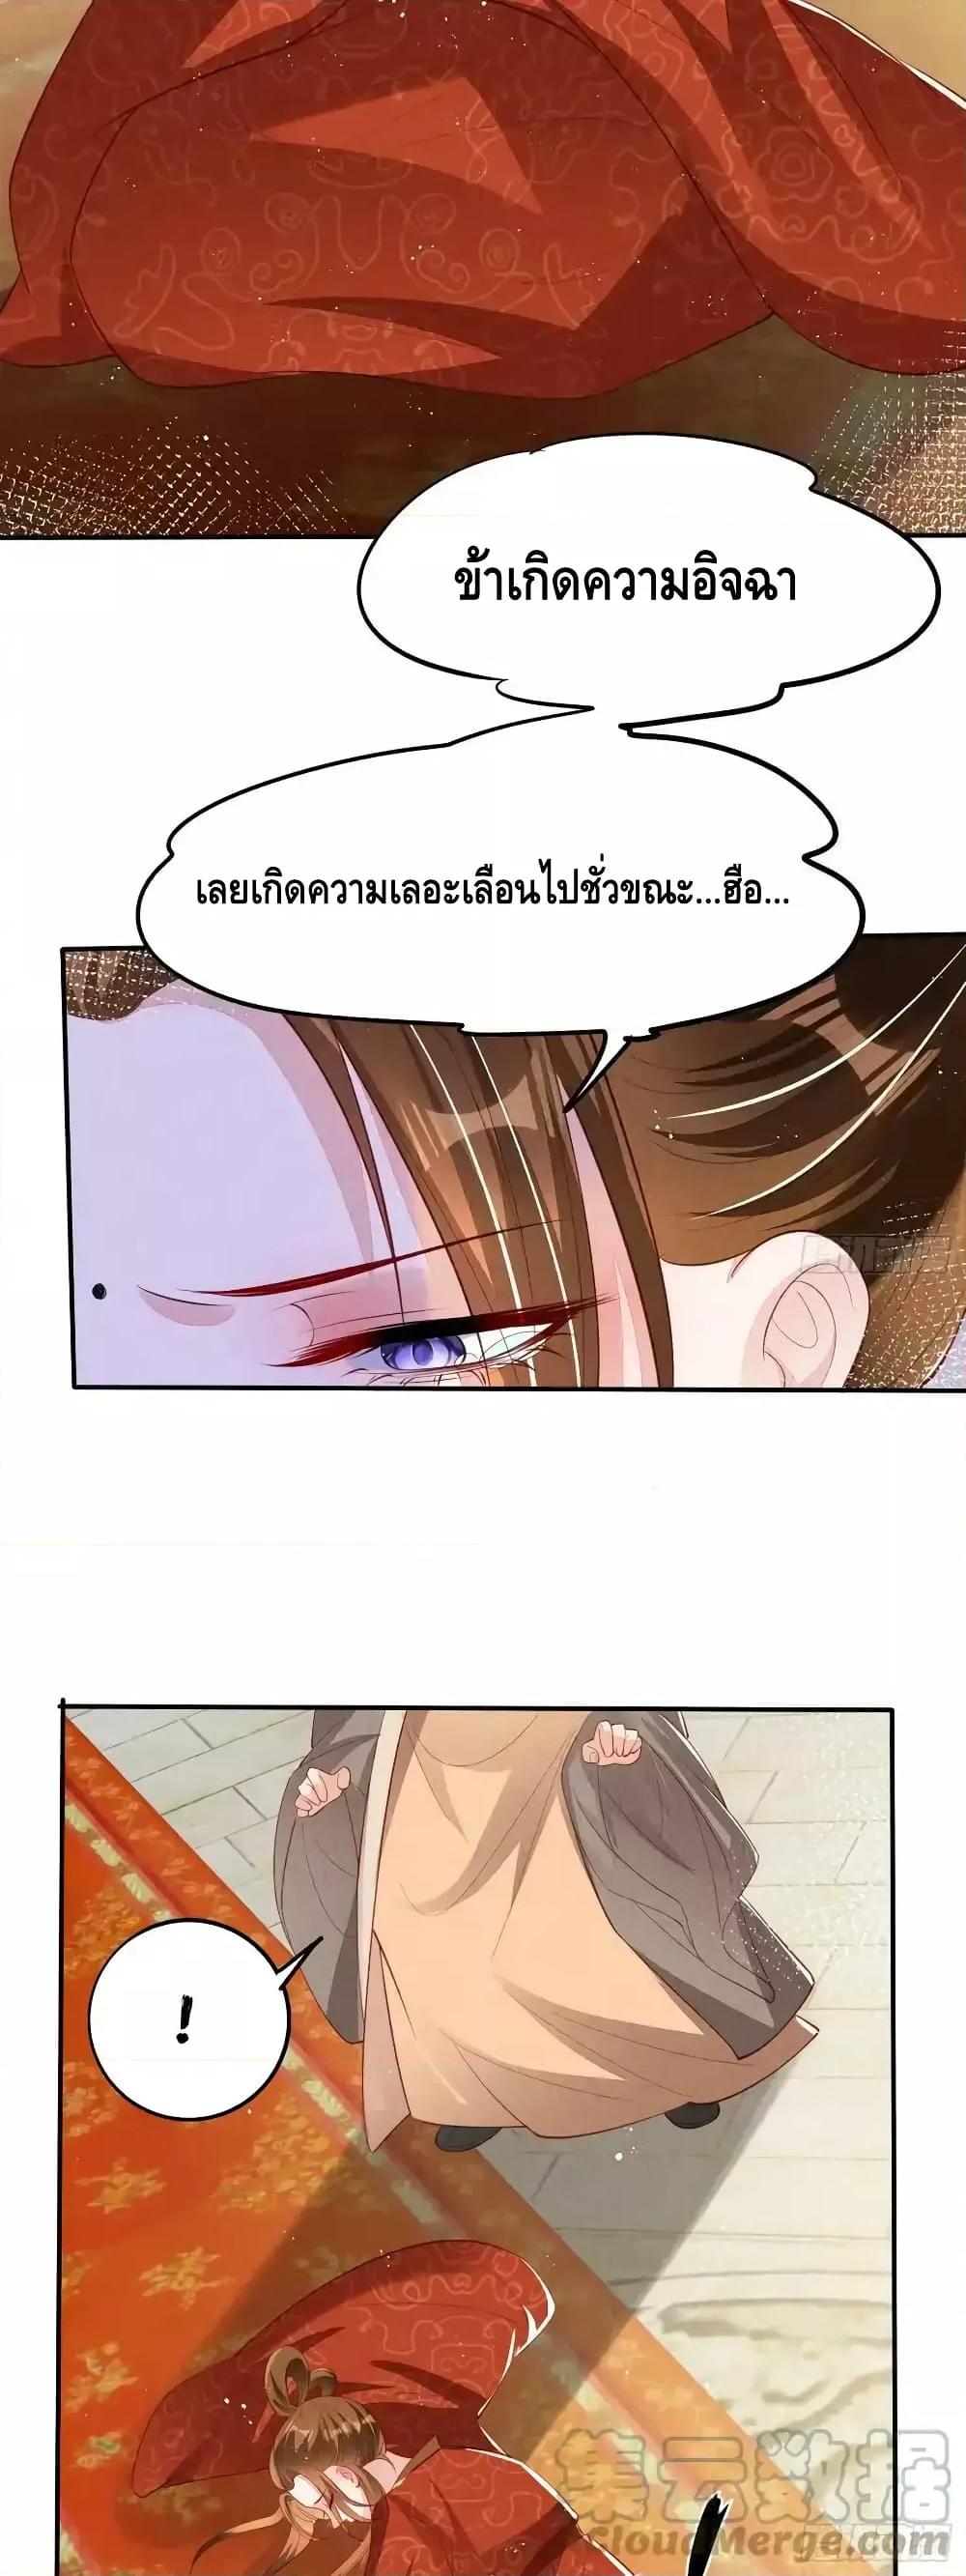 After I Bloom, a Hundred Flowers Will ill – ดอกไม้นับ ตอนที่ 70 (12)